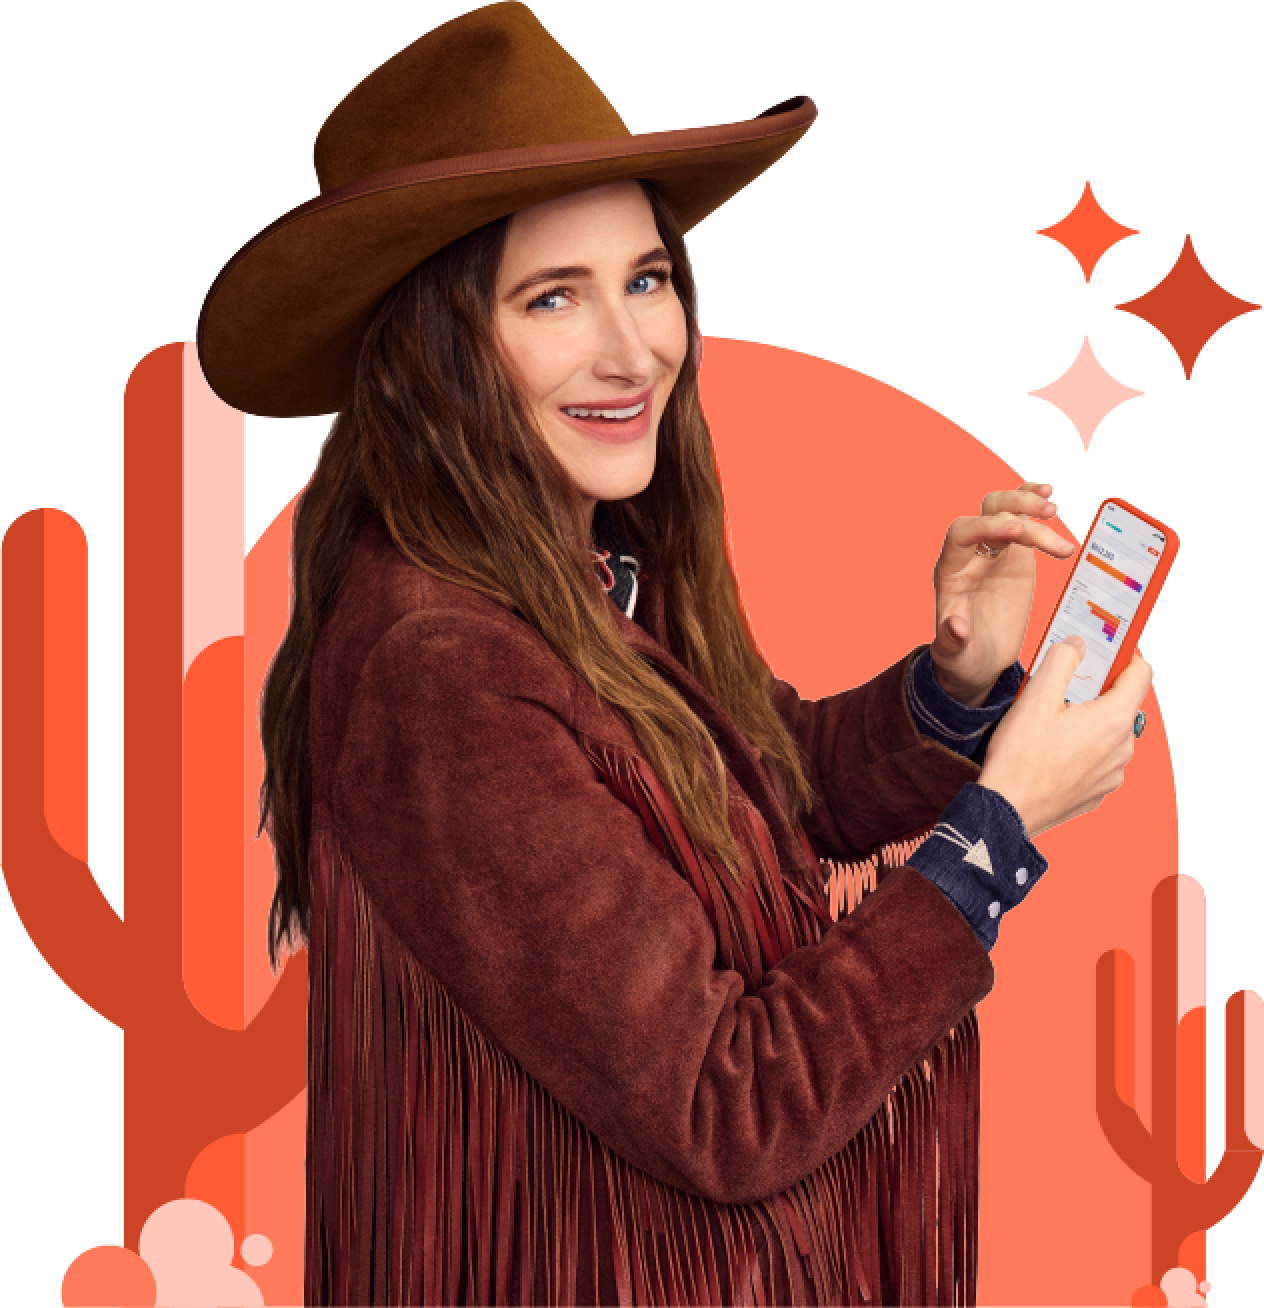 Kathryn Hahn, dressed as a western outlaw, holding mobile phone with HubSpot CRM mobile app UI, with cacti behind her